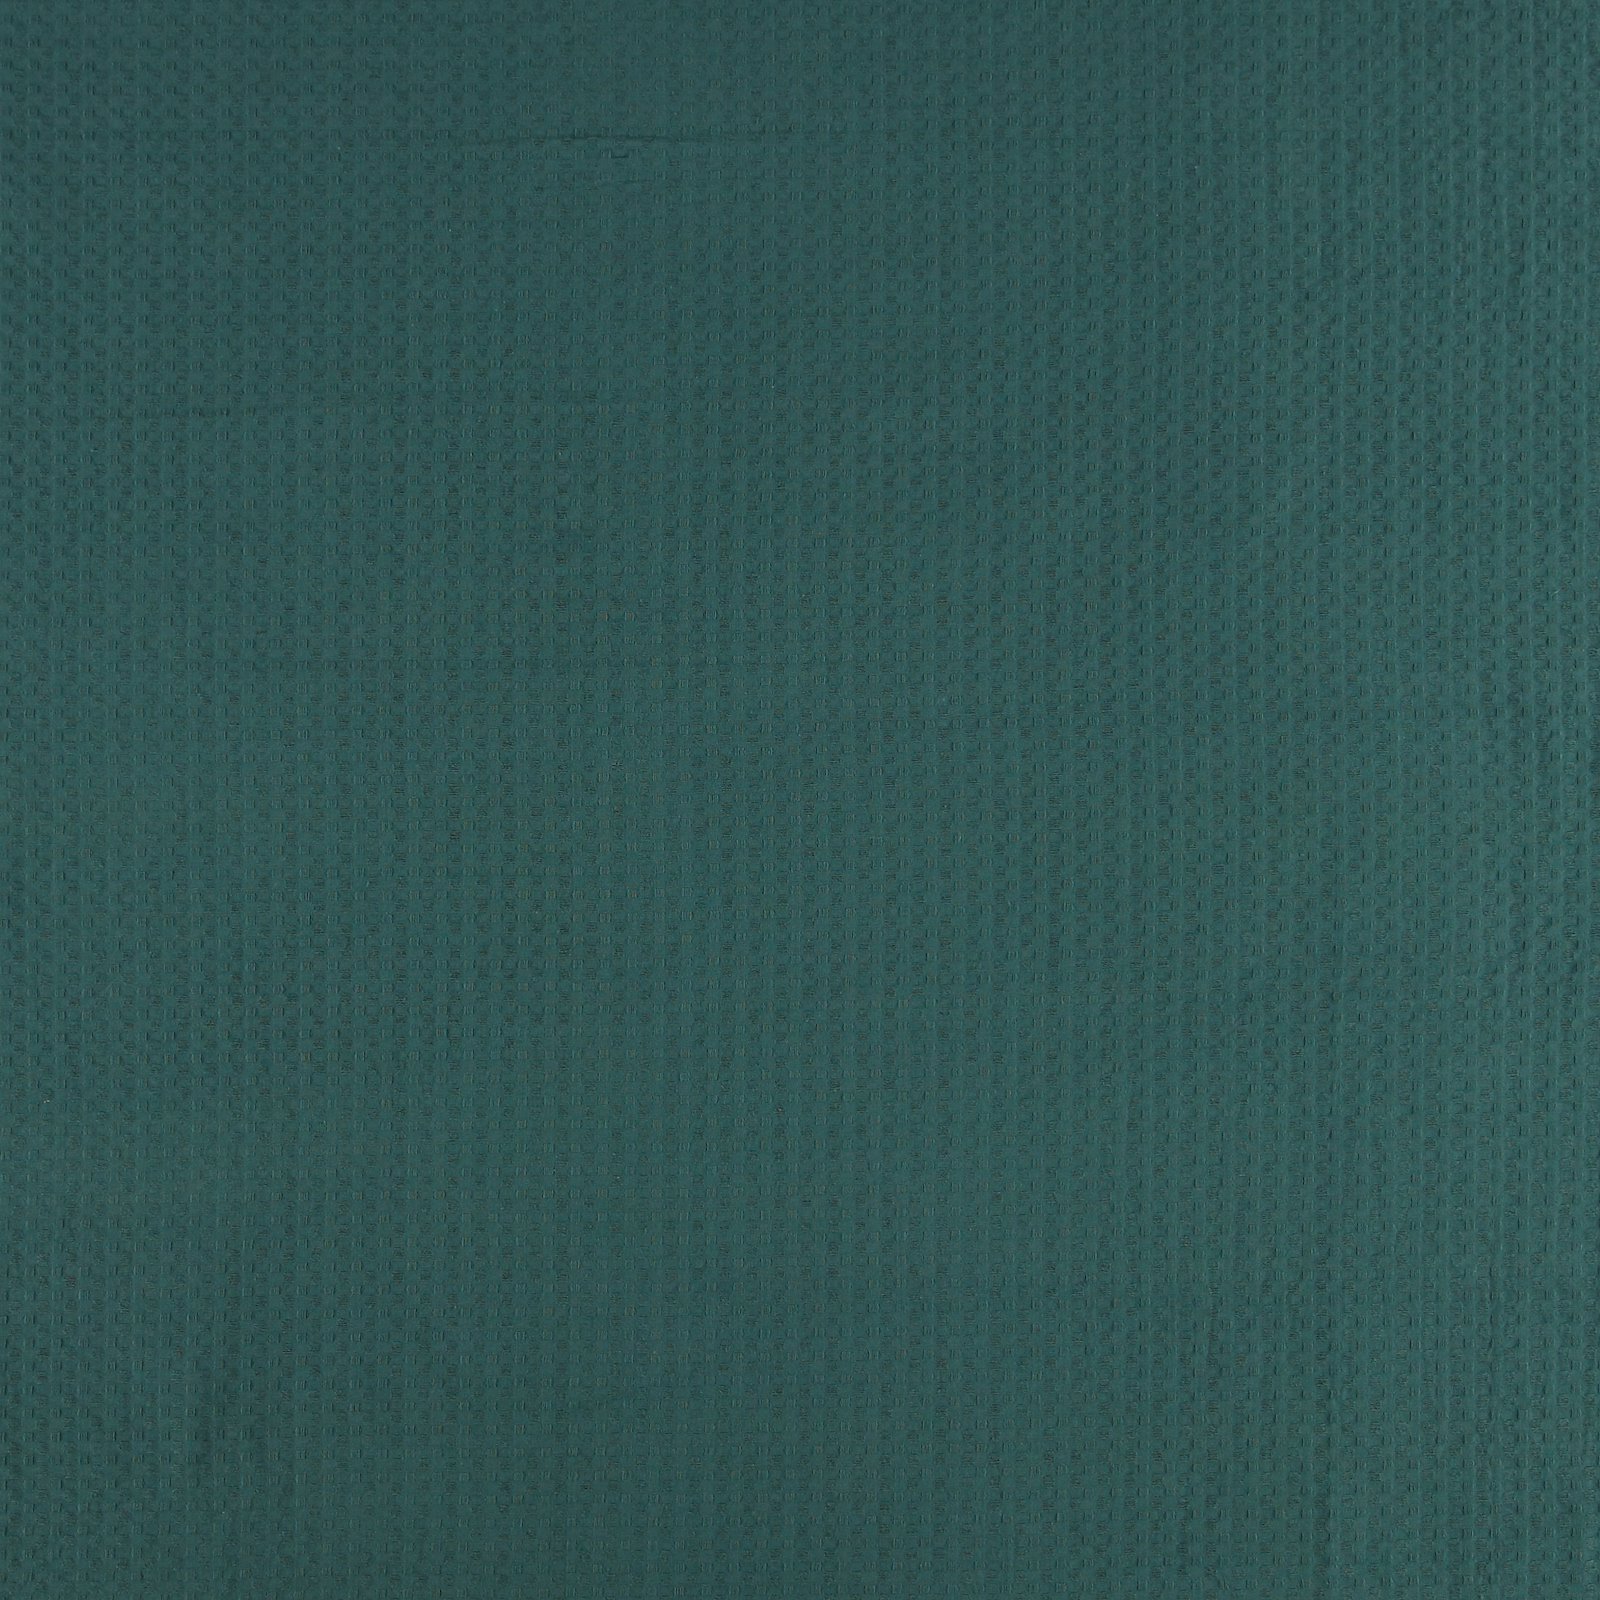 Woven jacquard petrol green w structure 501682_pack_solid